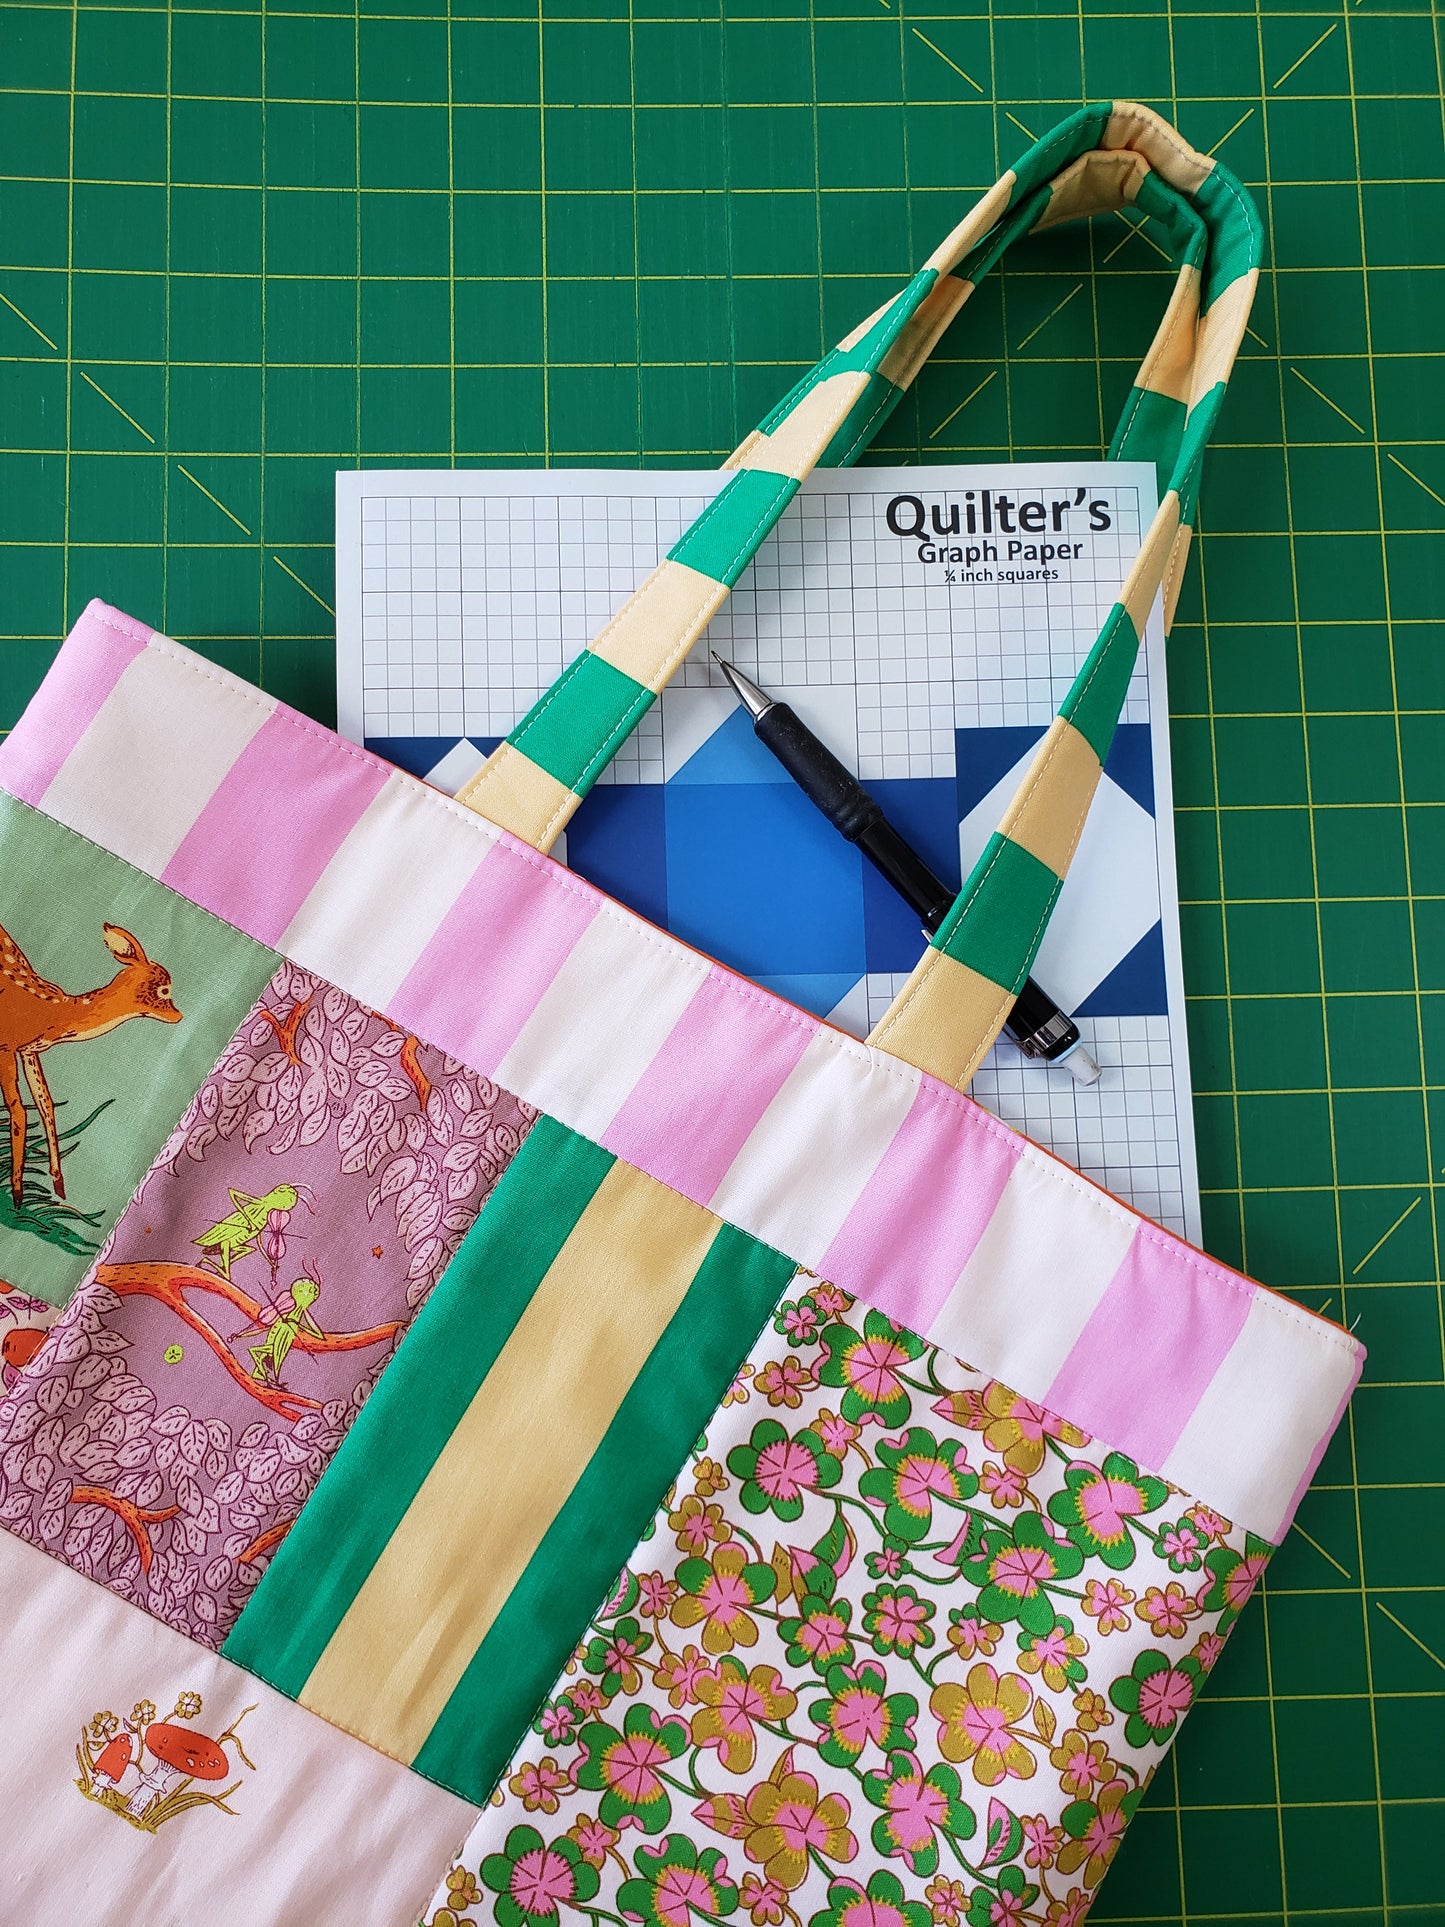 Totebag on a green grid with a pencil and quilter's graph paper pad.